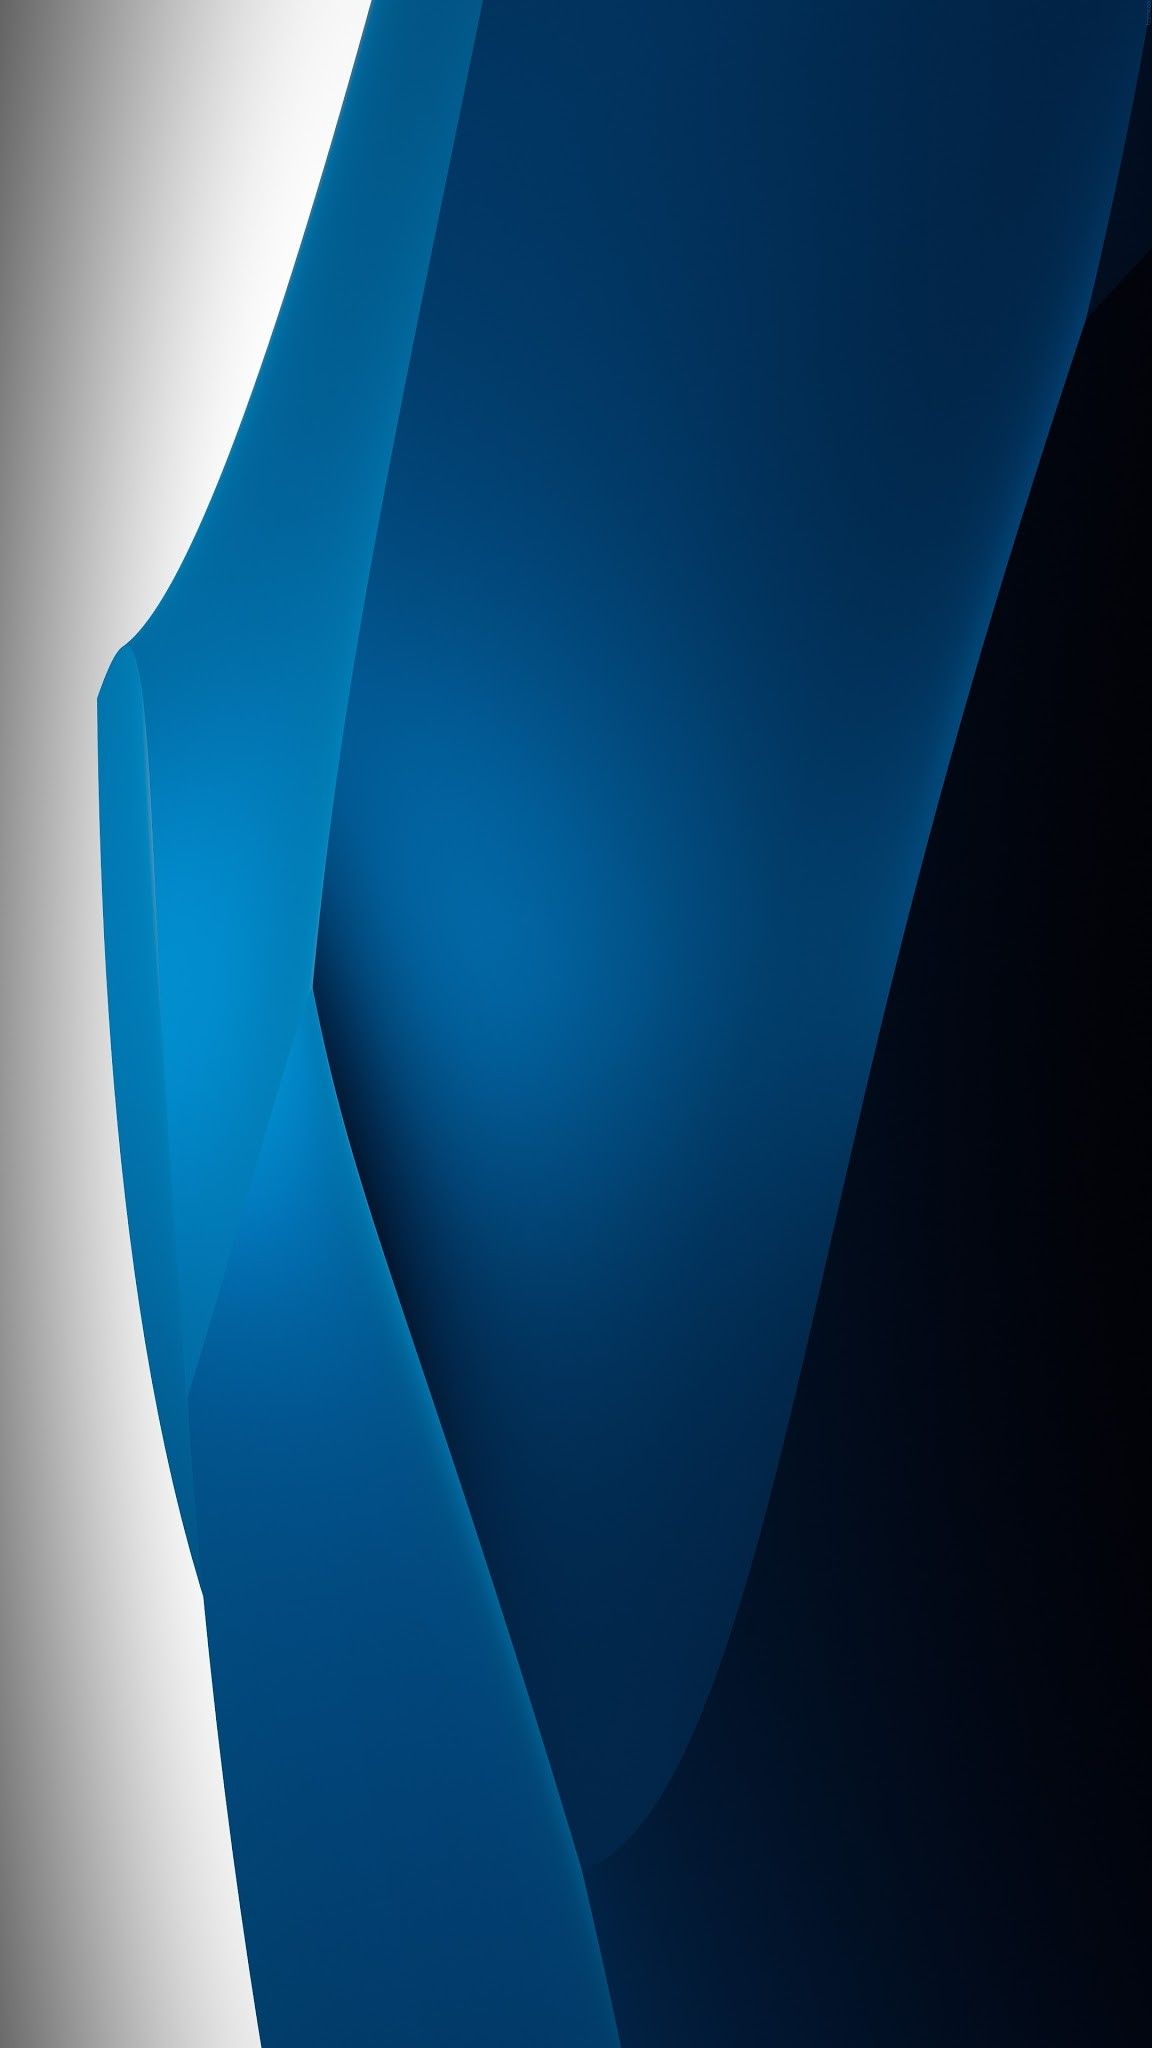 White Blue Black Abstract Wallpaper And Geometric